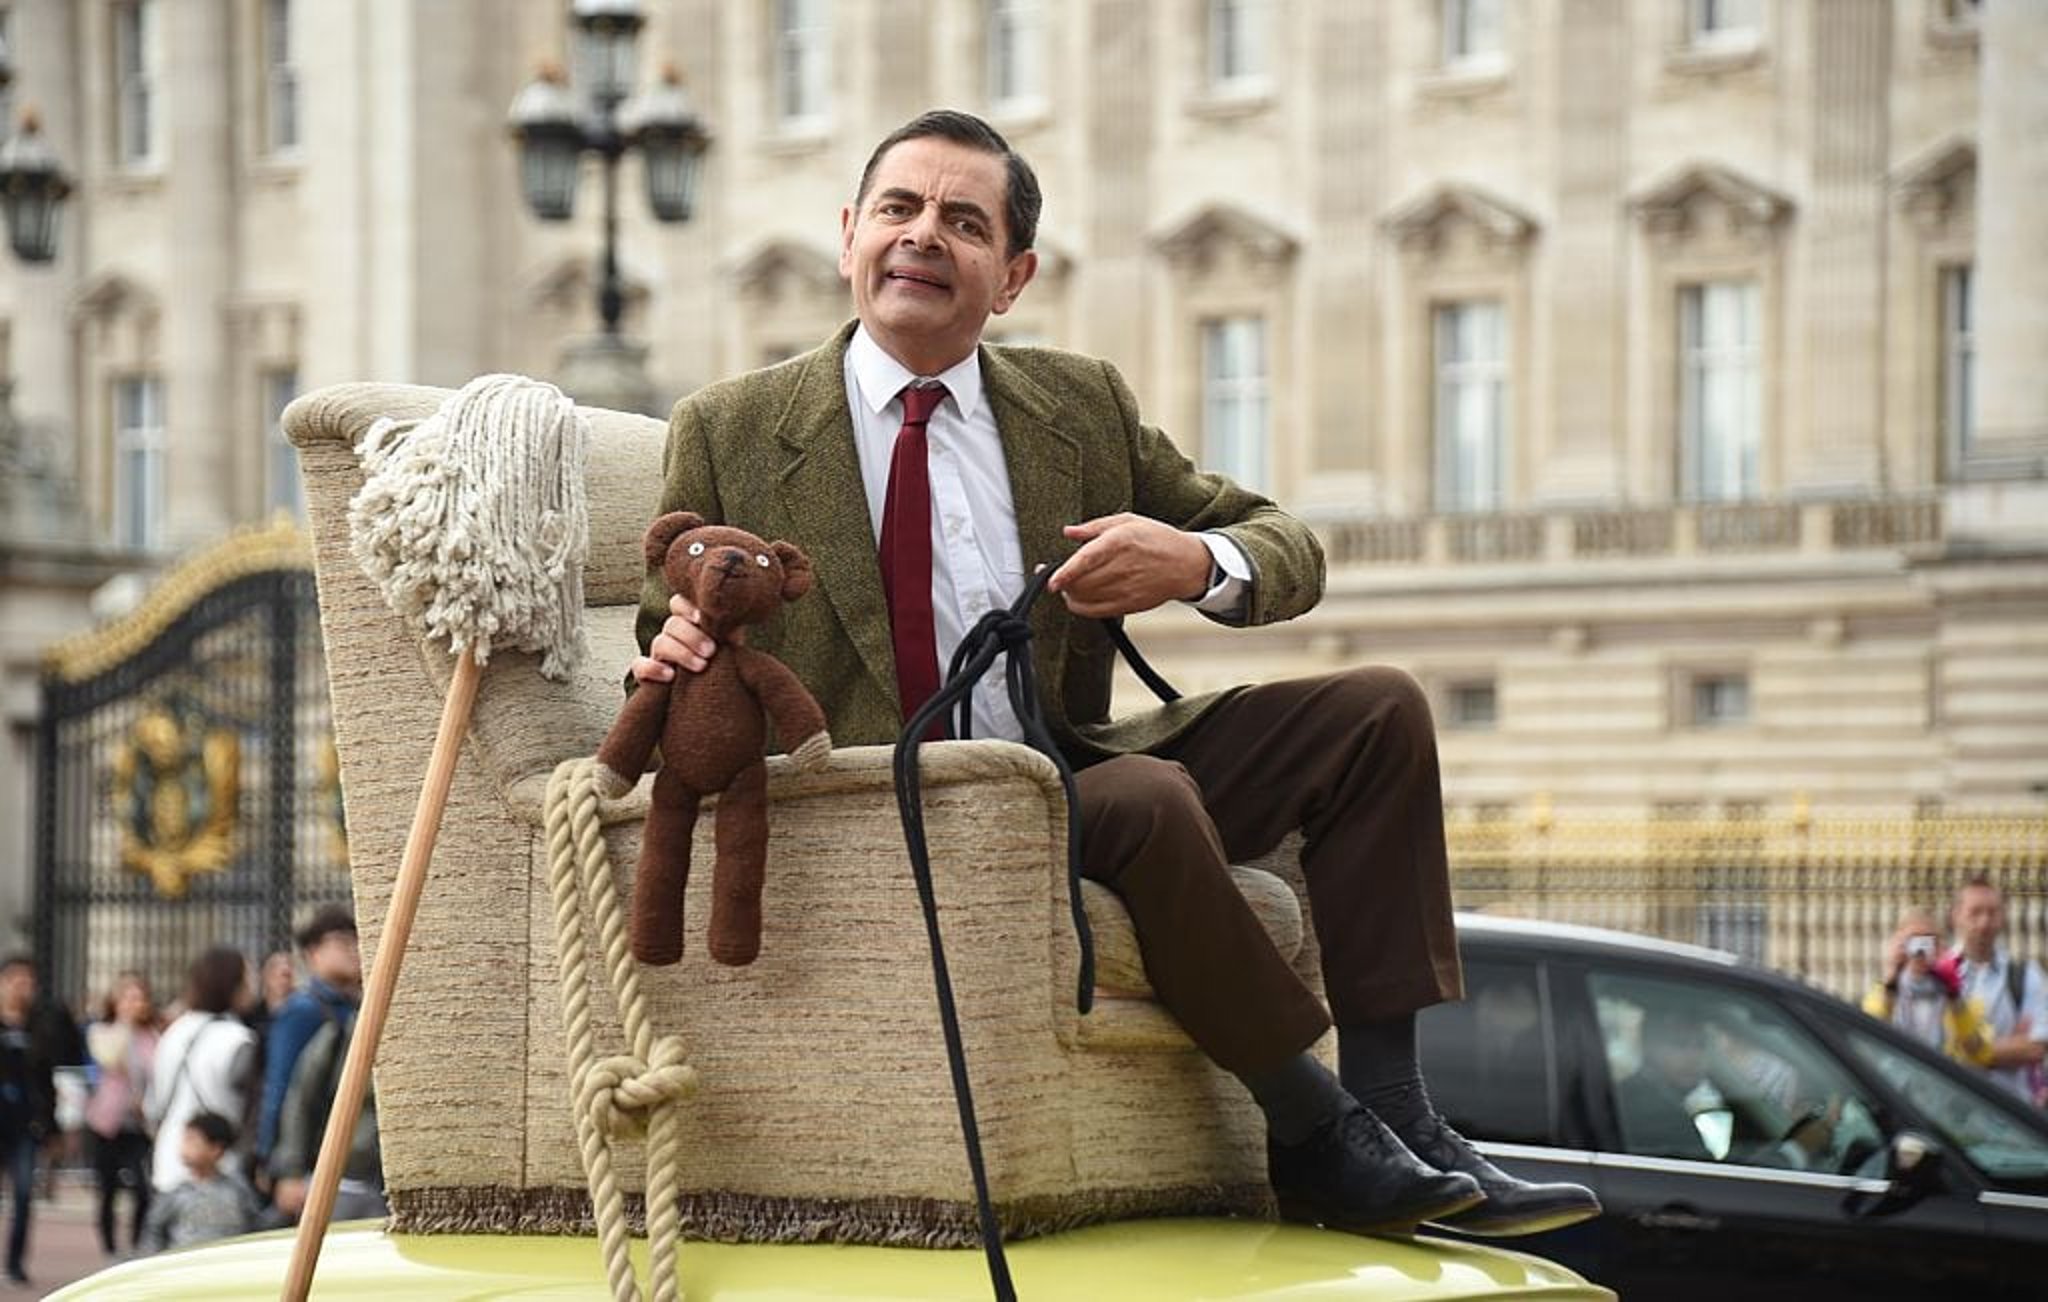 Rowan Atkinson portraying his role as Mr. Bean sitting on a chair on top of a car while holding Teddy